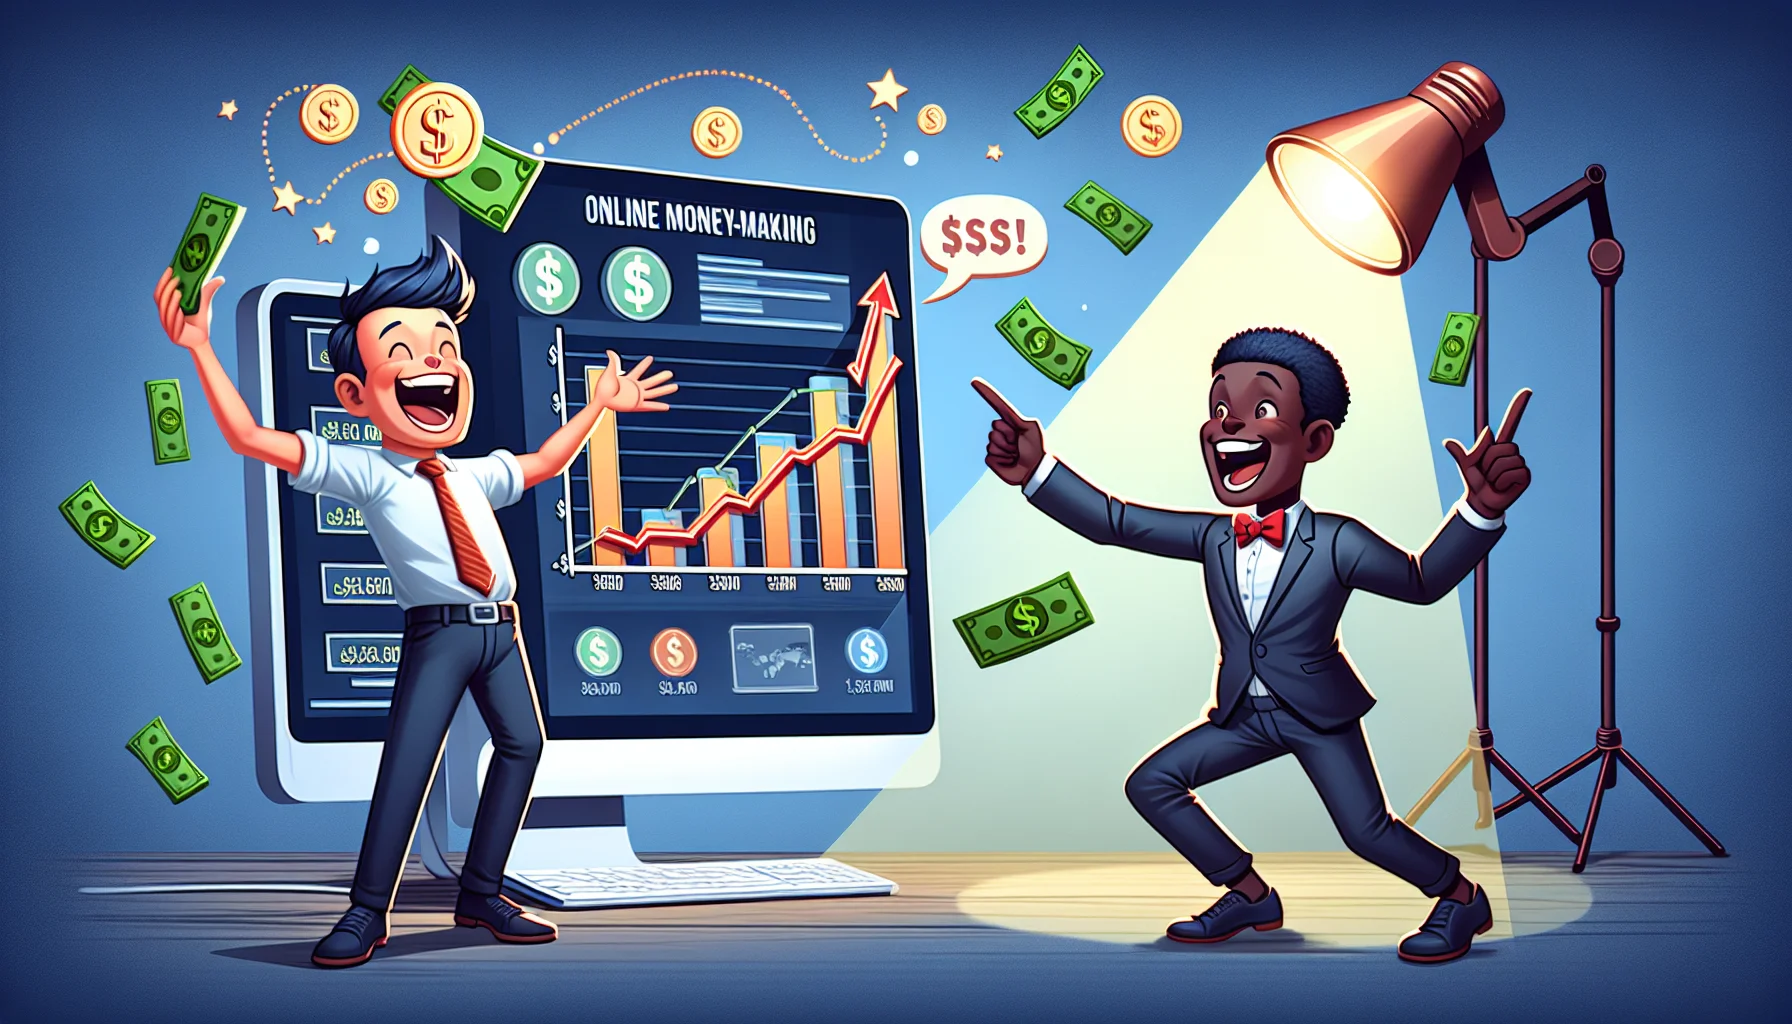 Depict a humorous and convincing scenario related to online money-making. Use symbols and elements that are typically associated with affiliate marketing programs, such as a person ecstatically pointing towards a computer screen displaying impressive revenue charts, peppered with dollar signs. On the other side, illustrate someone explaining the scheme with big gestures and a spotlight. Reflect a lively atmosphere and make sure that both characters have different gender and race: one a Black female, and the other a Caucasian male.